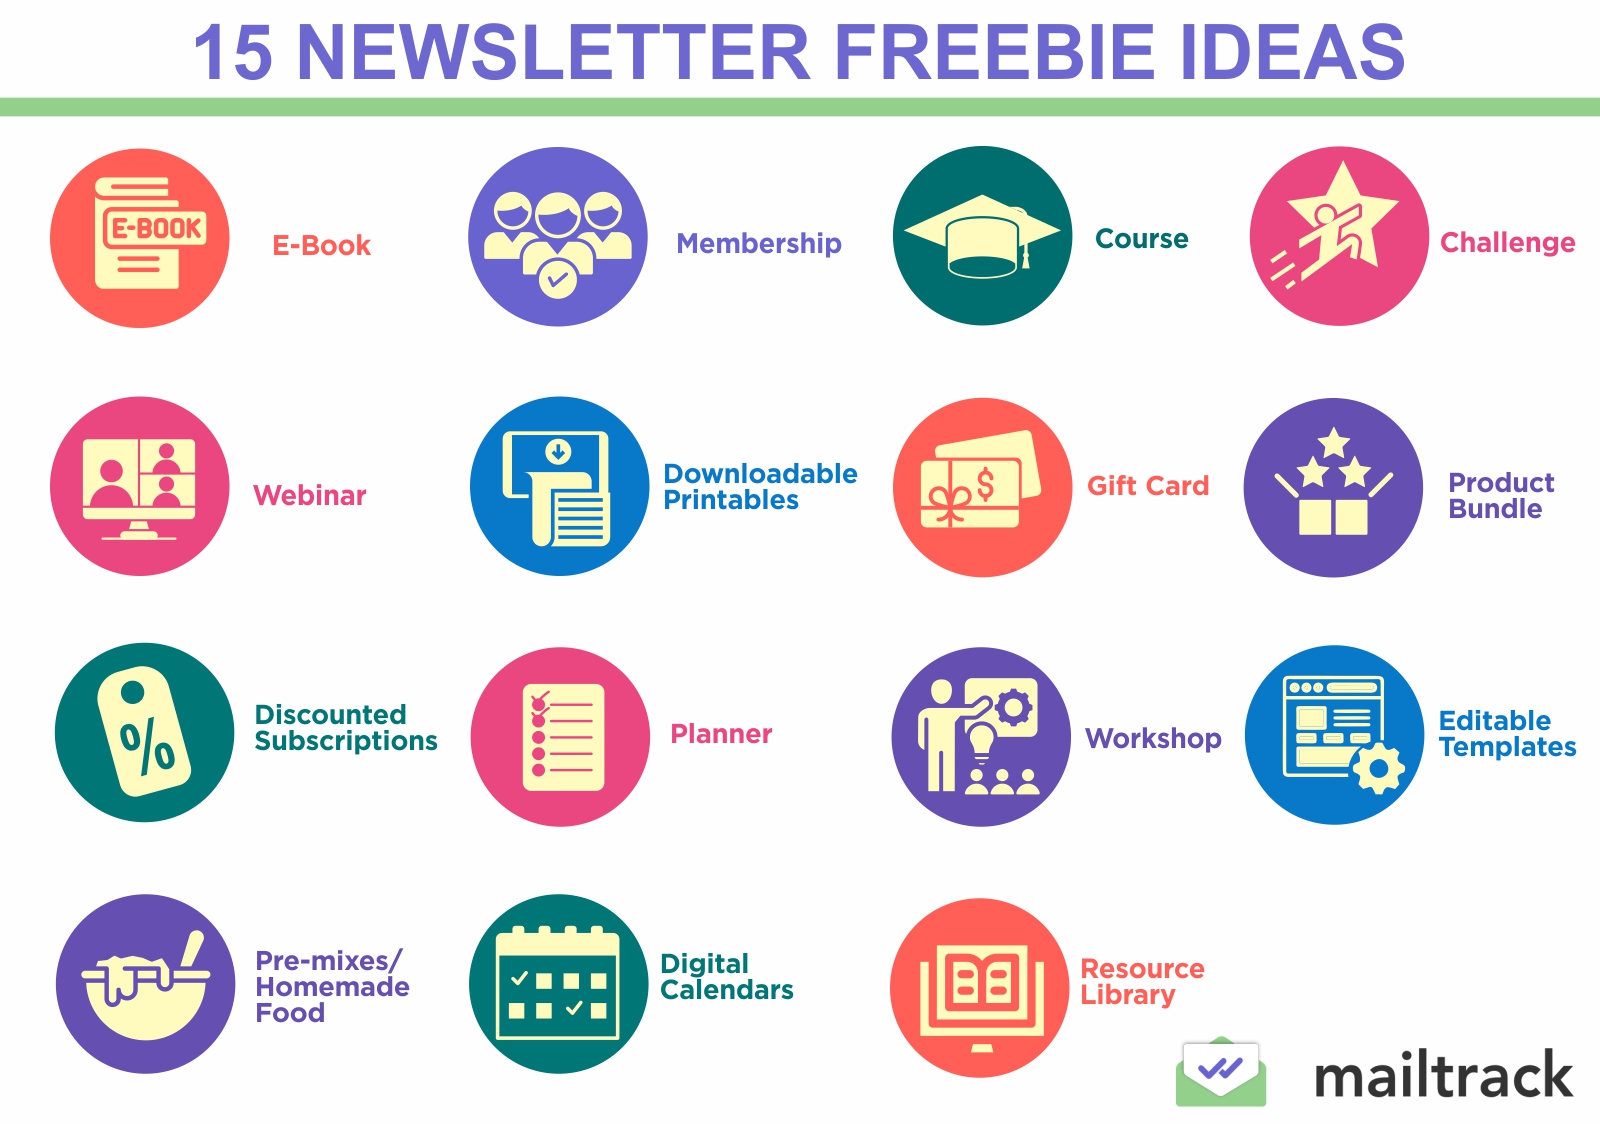 15 Newsletter Freebie Ideas To Grow Your Subscriber List